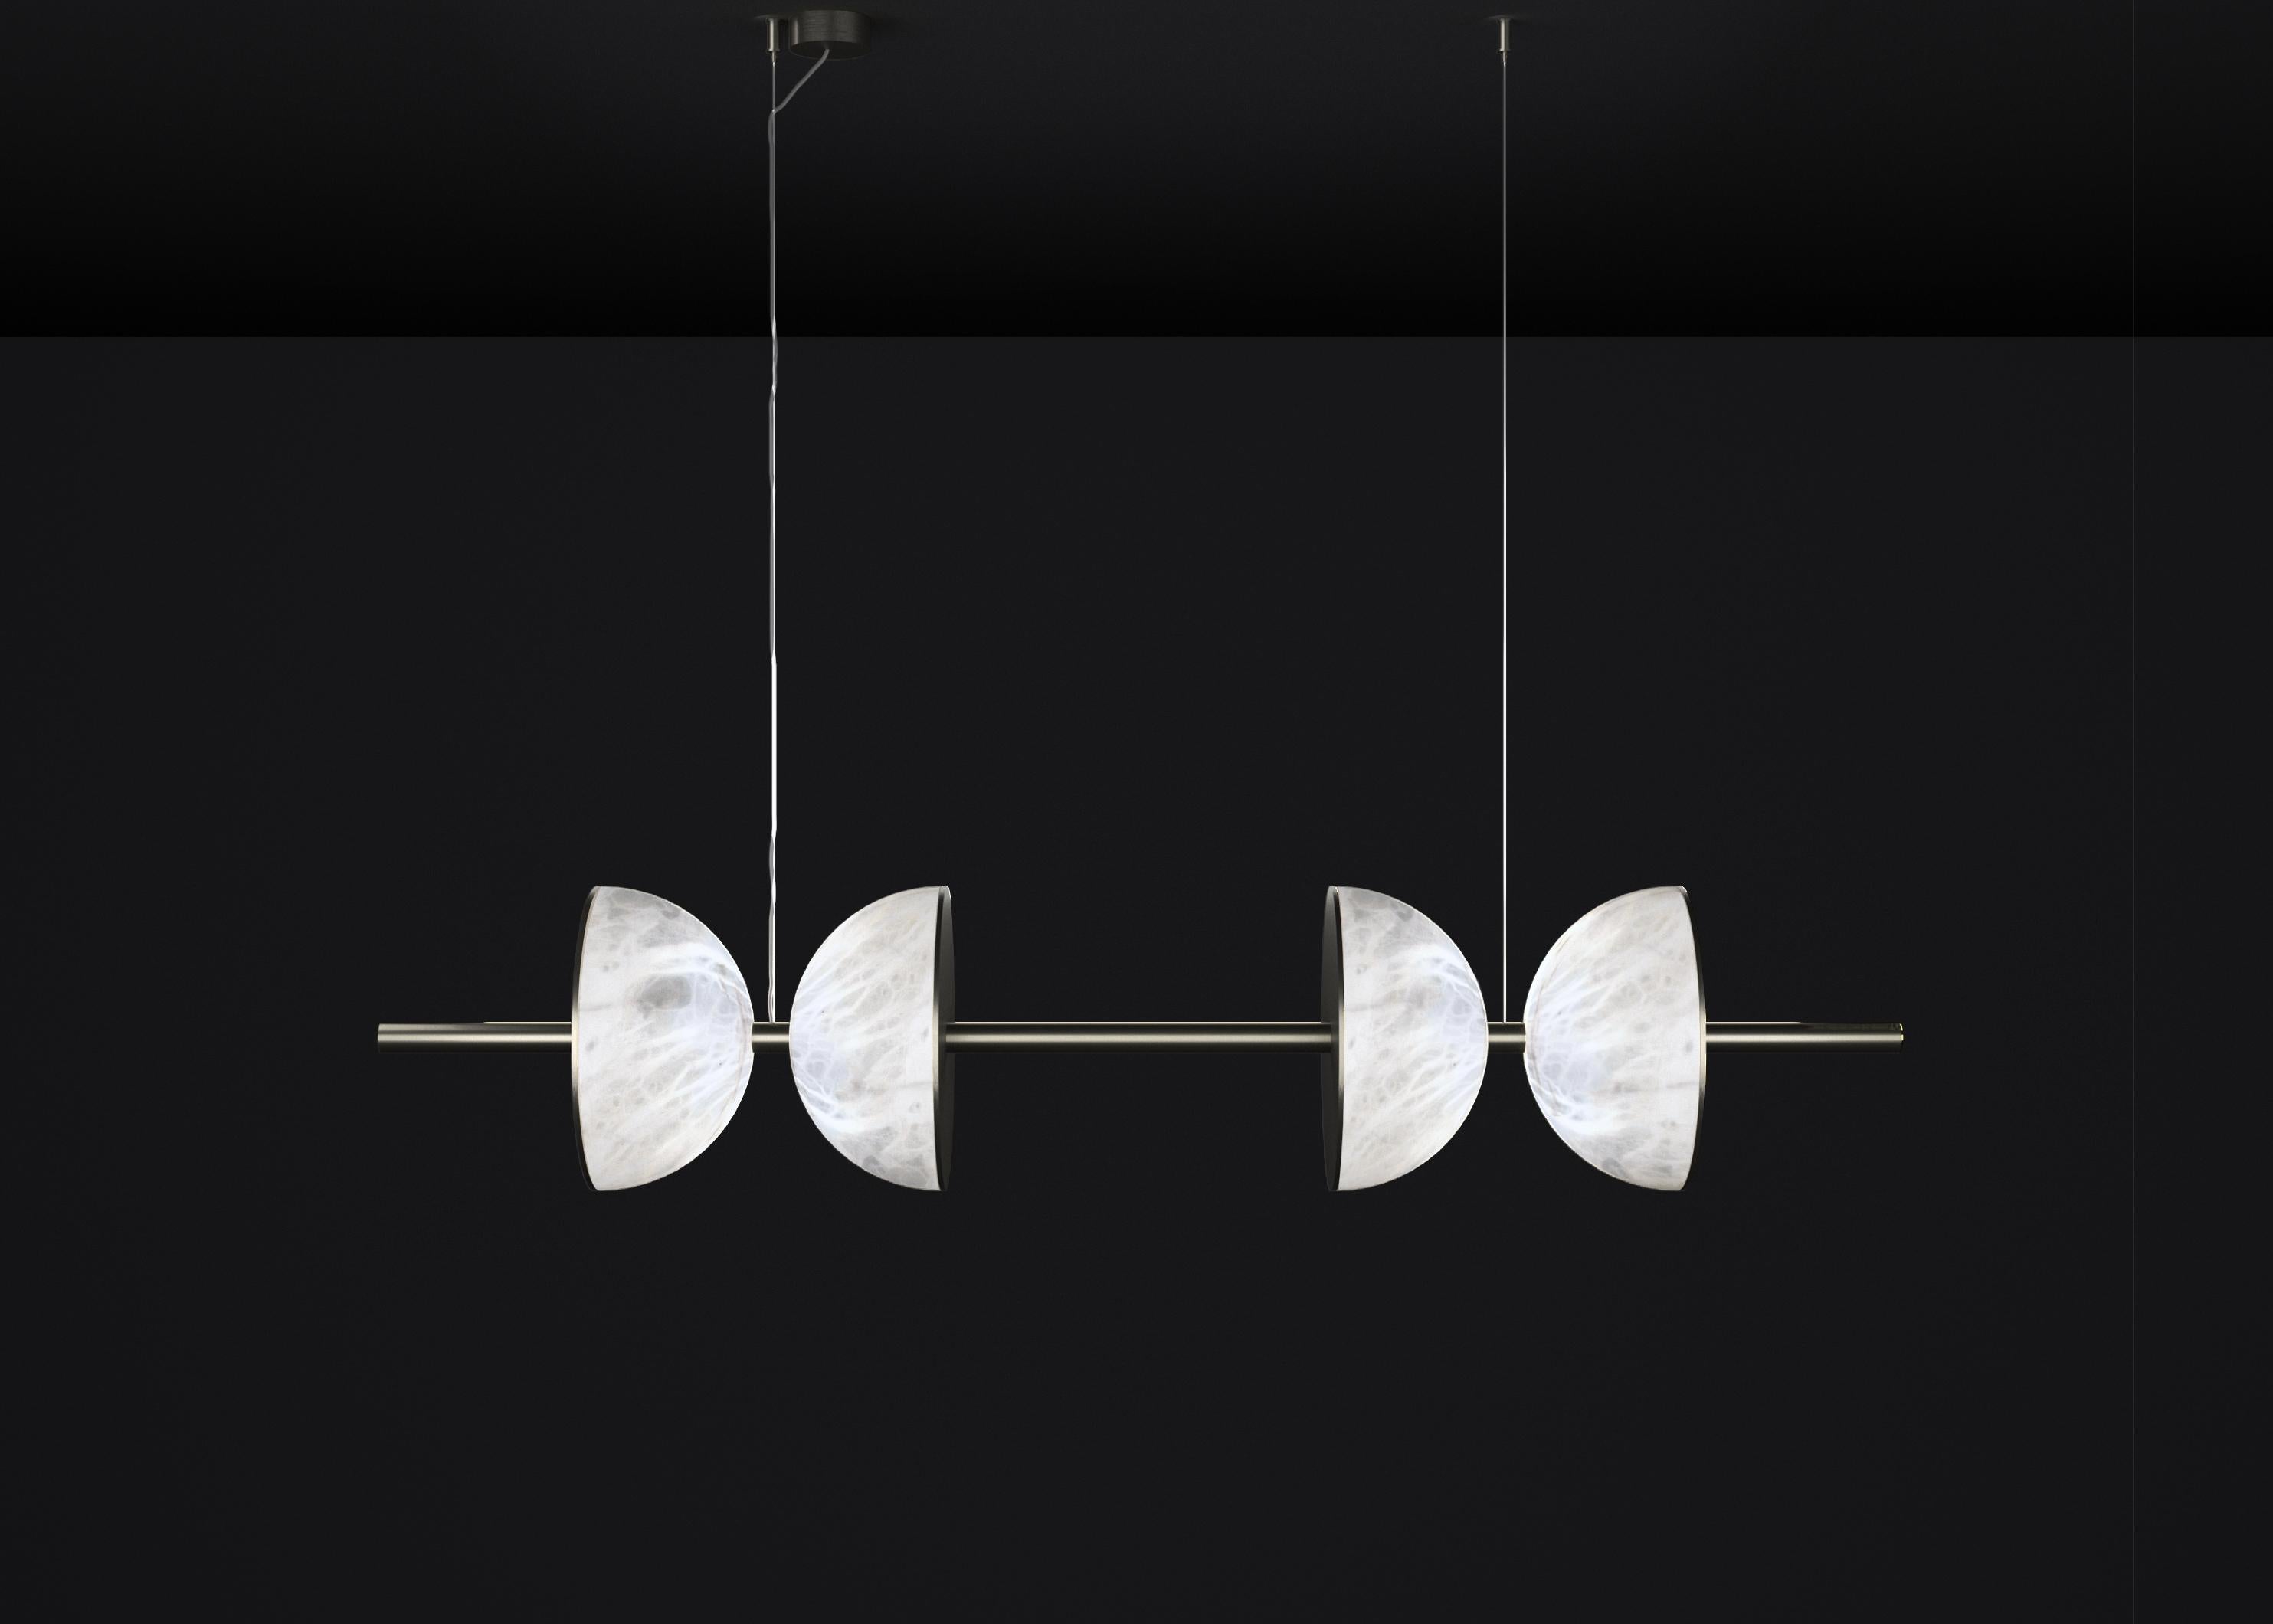 Ermes Brushed Black Metal And Alabaster Pendant Light 2 by Alabastro Italiano
Dimensions: D 30 x W 150 x H 300 cm.
Materials: White alabaster and brushed black metal.

Available in different finishes: Shiny Silver, Bronze, Brushed Brass, Ruggine of